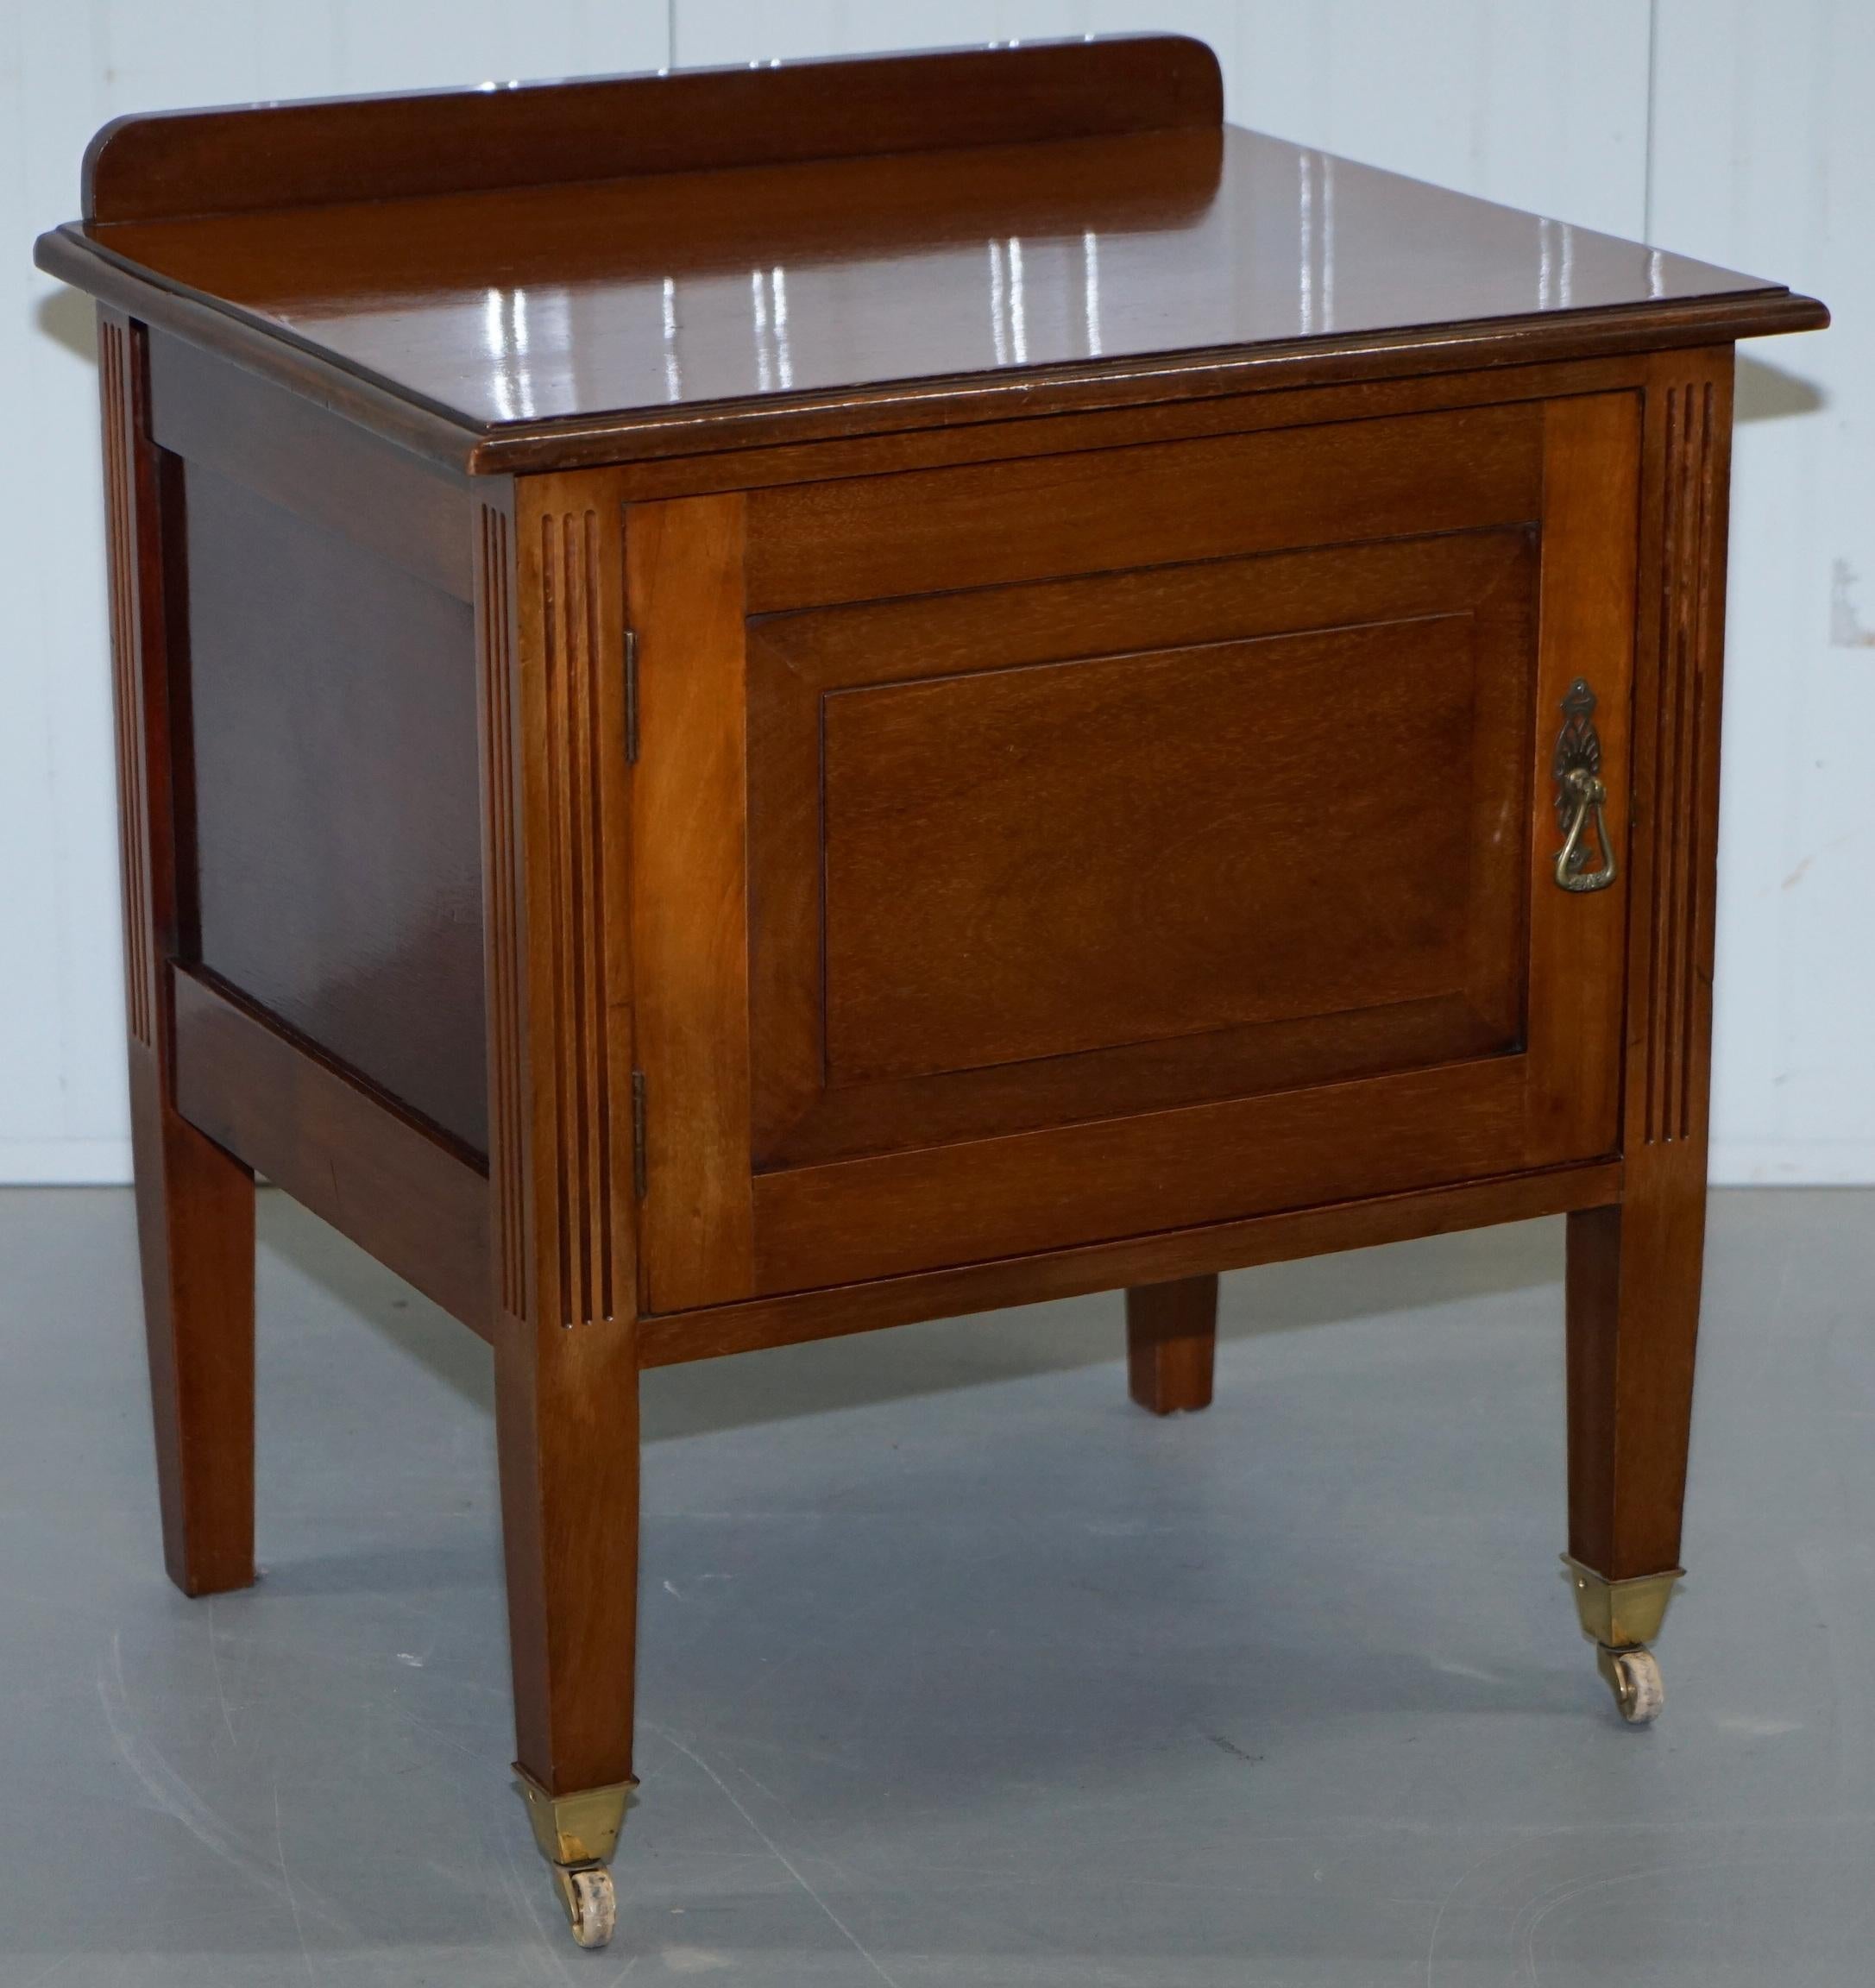 We are delighted to offer for sale this lovely pair of Georgian style bedside tables or side lamp end wine tables in solid flamed mahogany and finished with brass castors

A very good looking and functional pair, these can be used for many